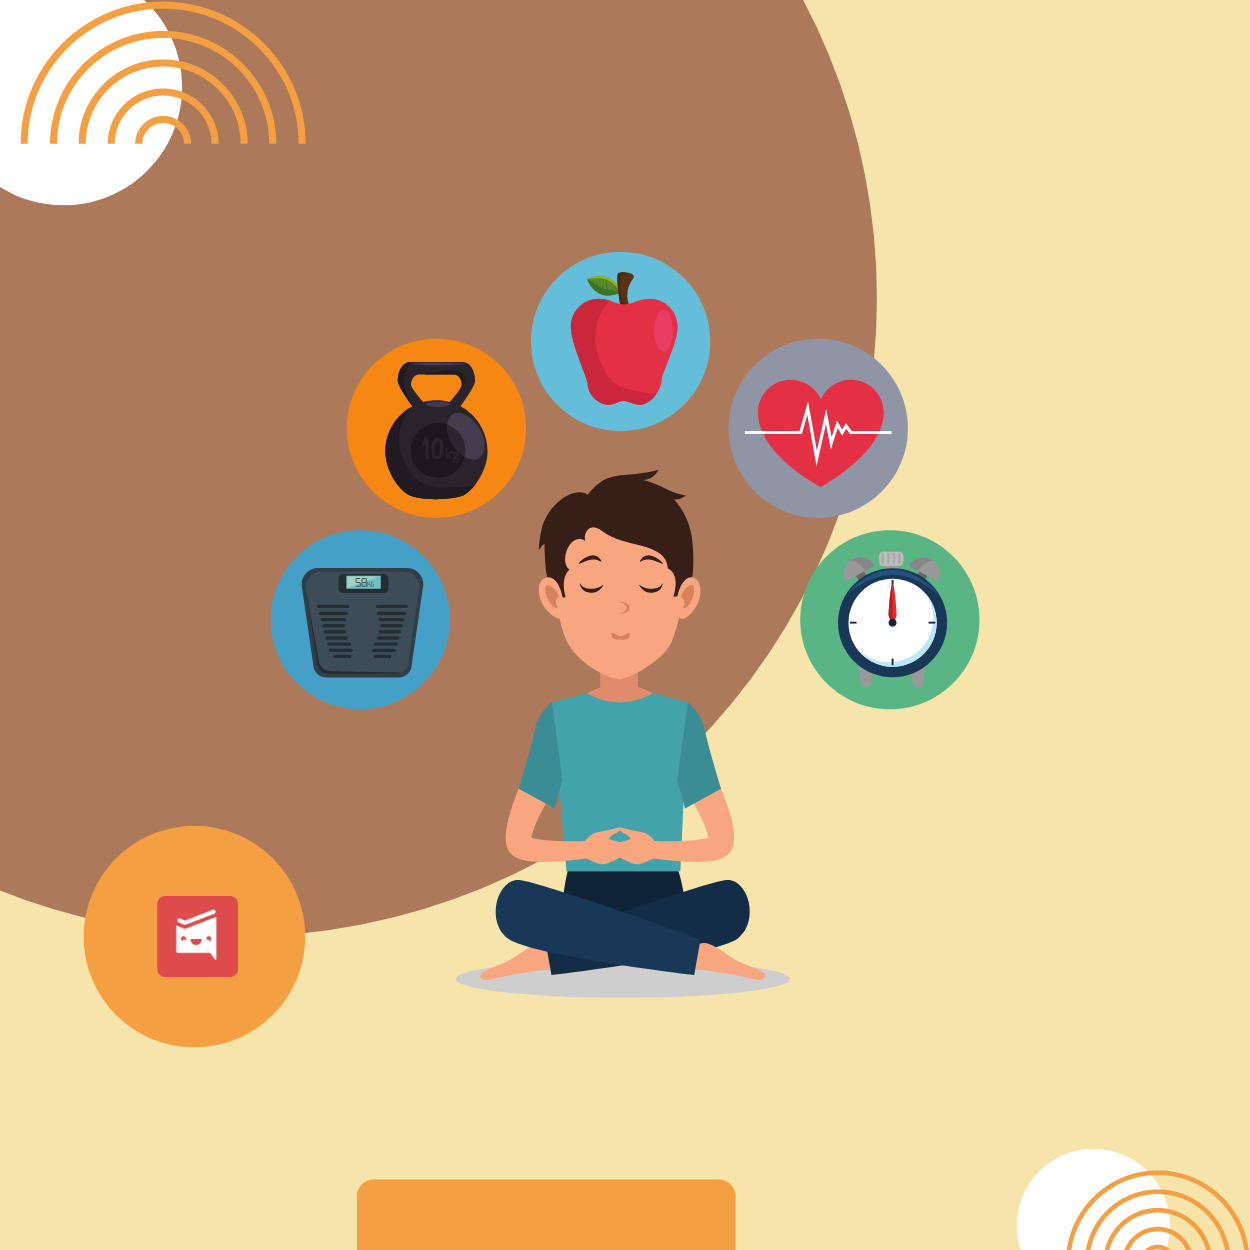 6 Intelligent Ways To Support The Wellbeing Of Your Remote Employees